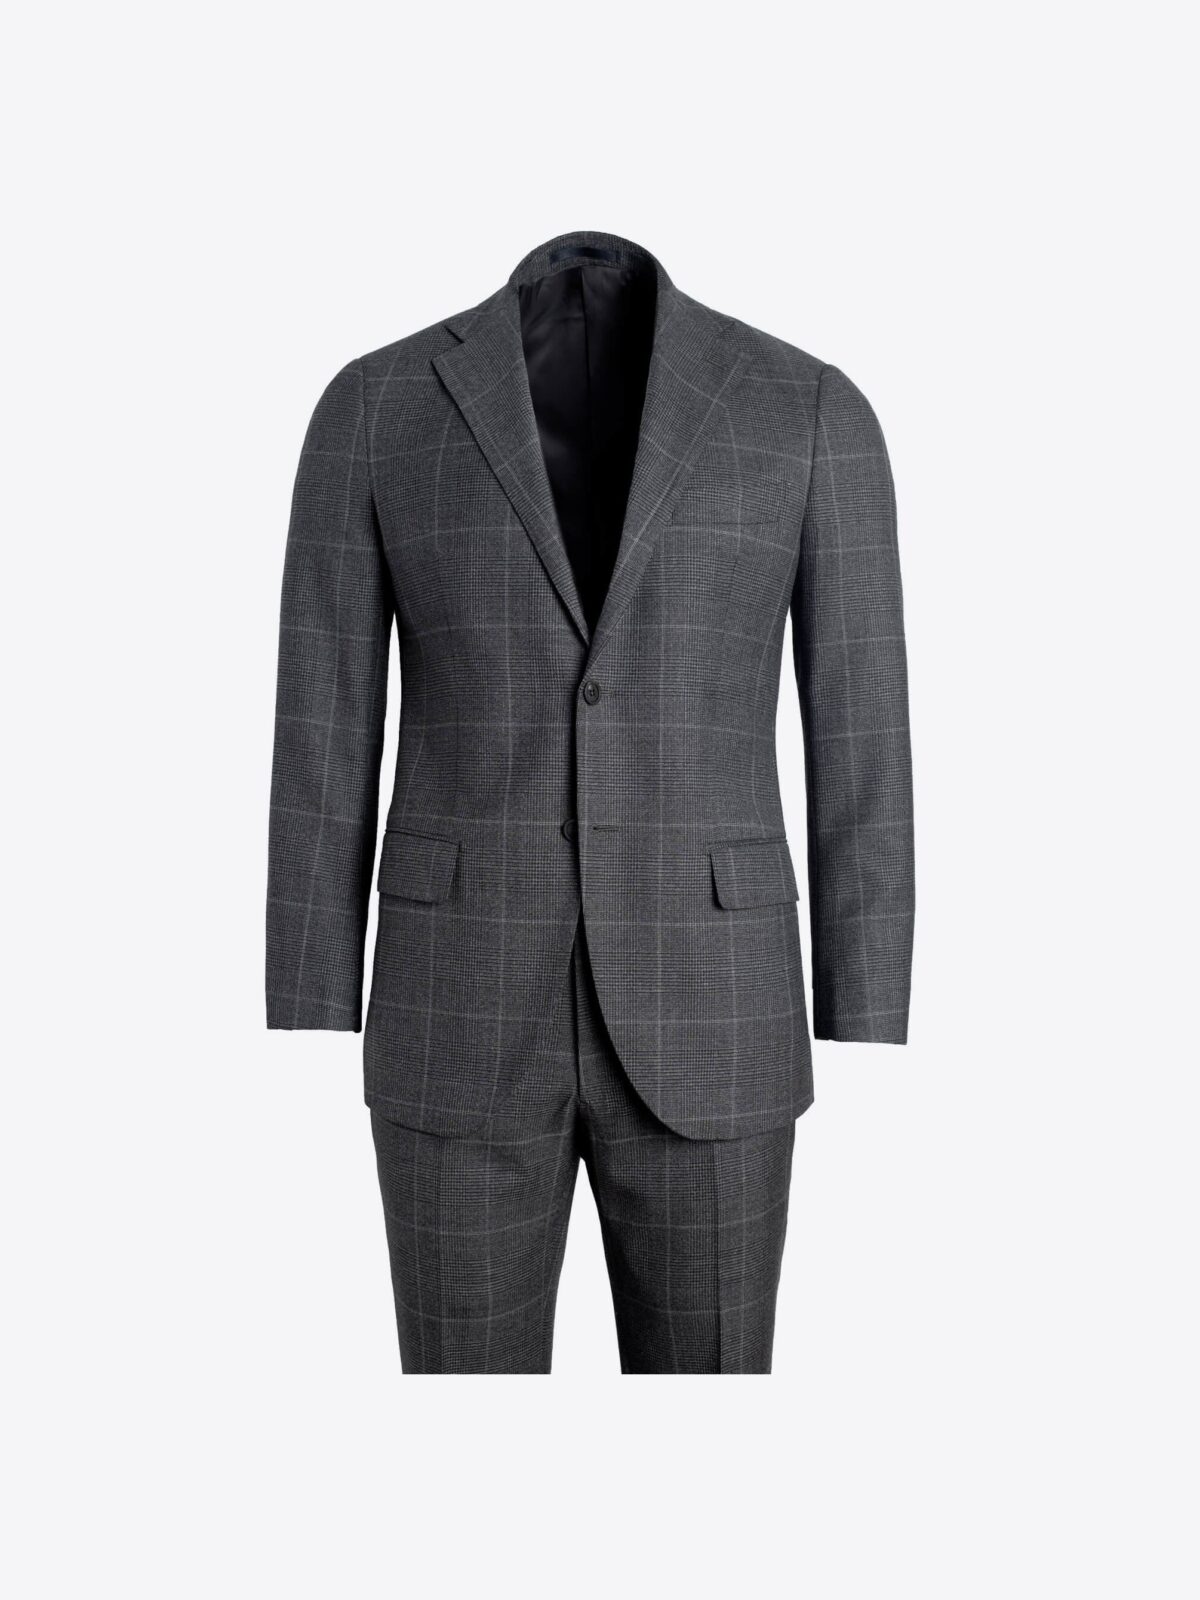 Grey Melange Allen Suit with Side Tab Dress Pants - Custom Fit Tailored  Clothing